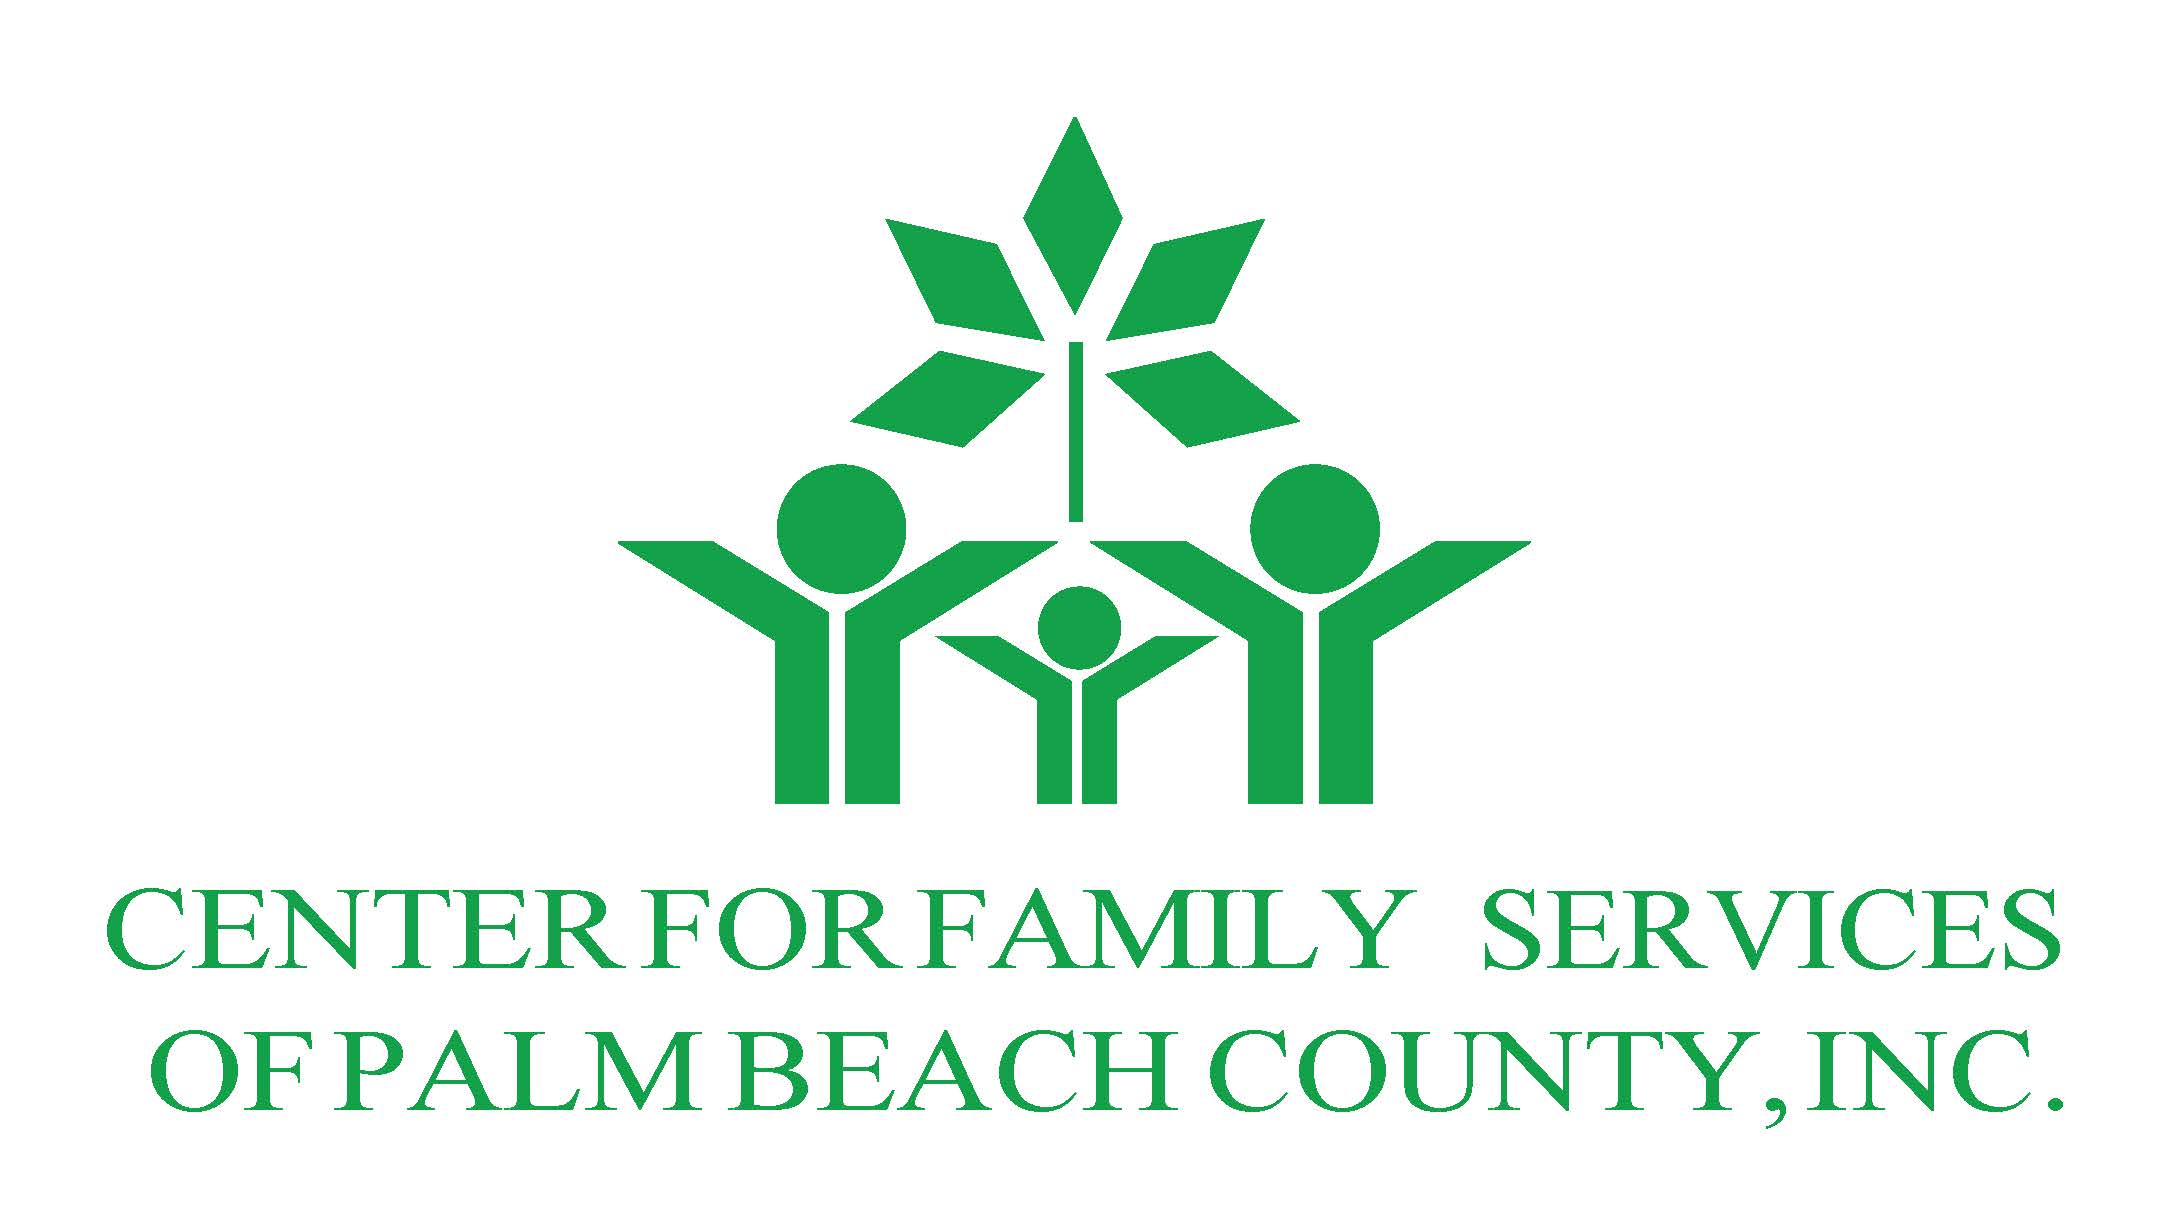 Center for Family Services of Palm Beach County